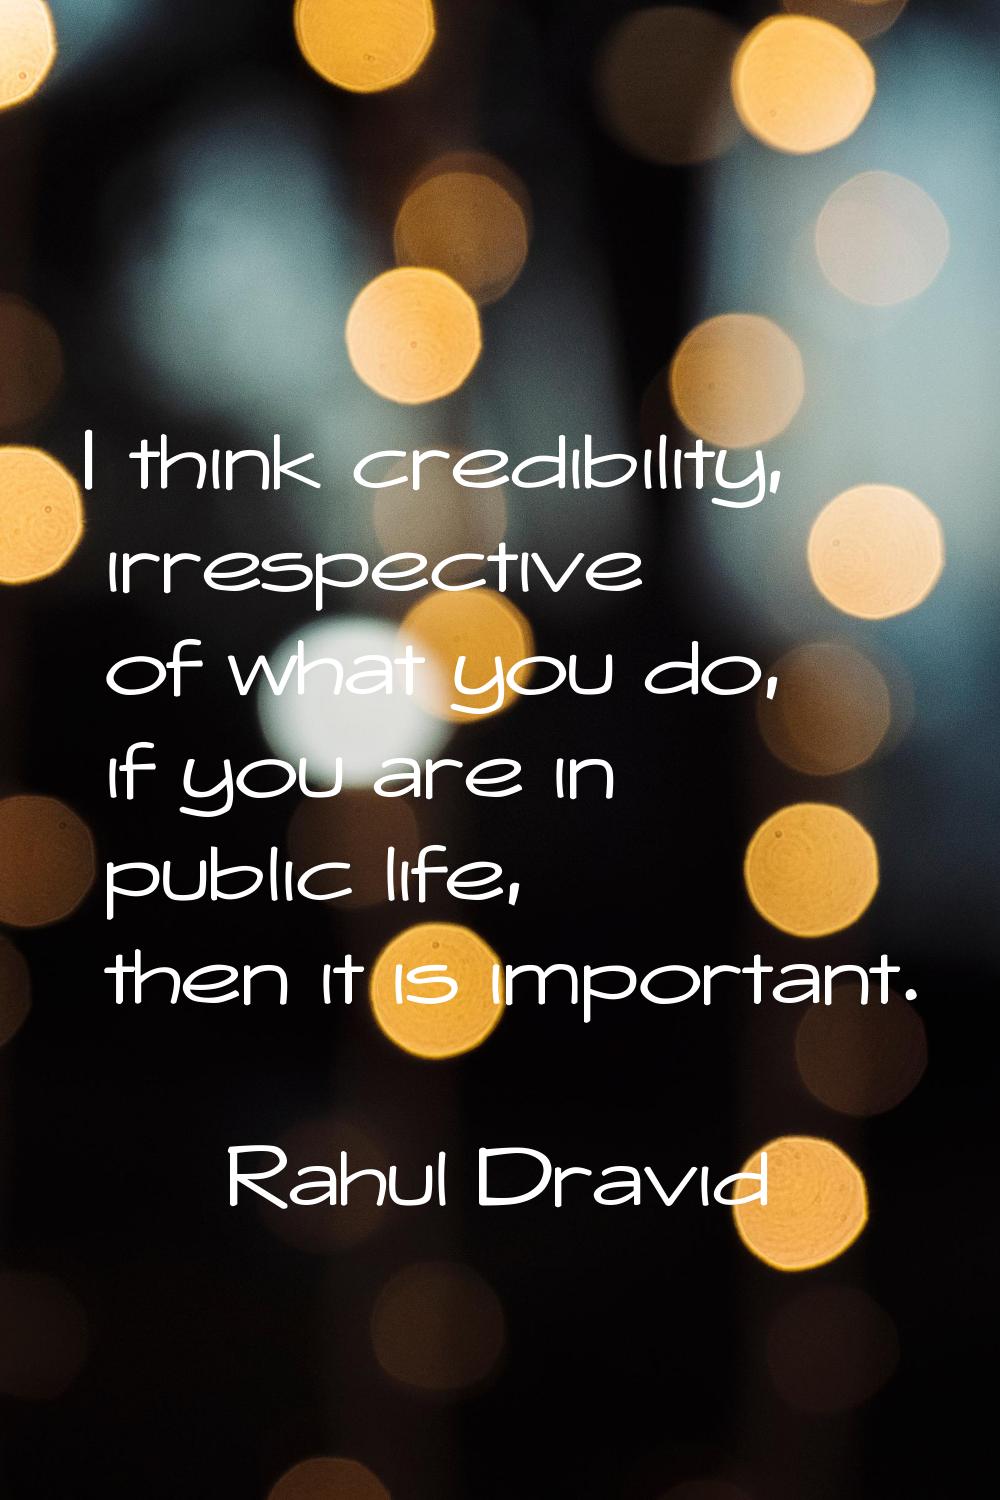 I think credibility, irrespective of what you do, if you are in public life, then it is important.